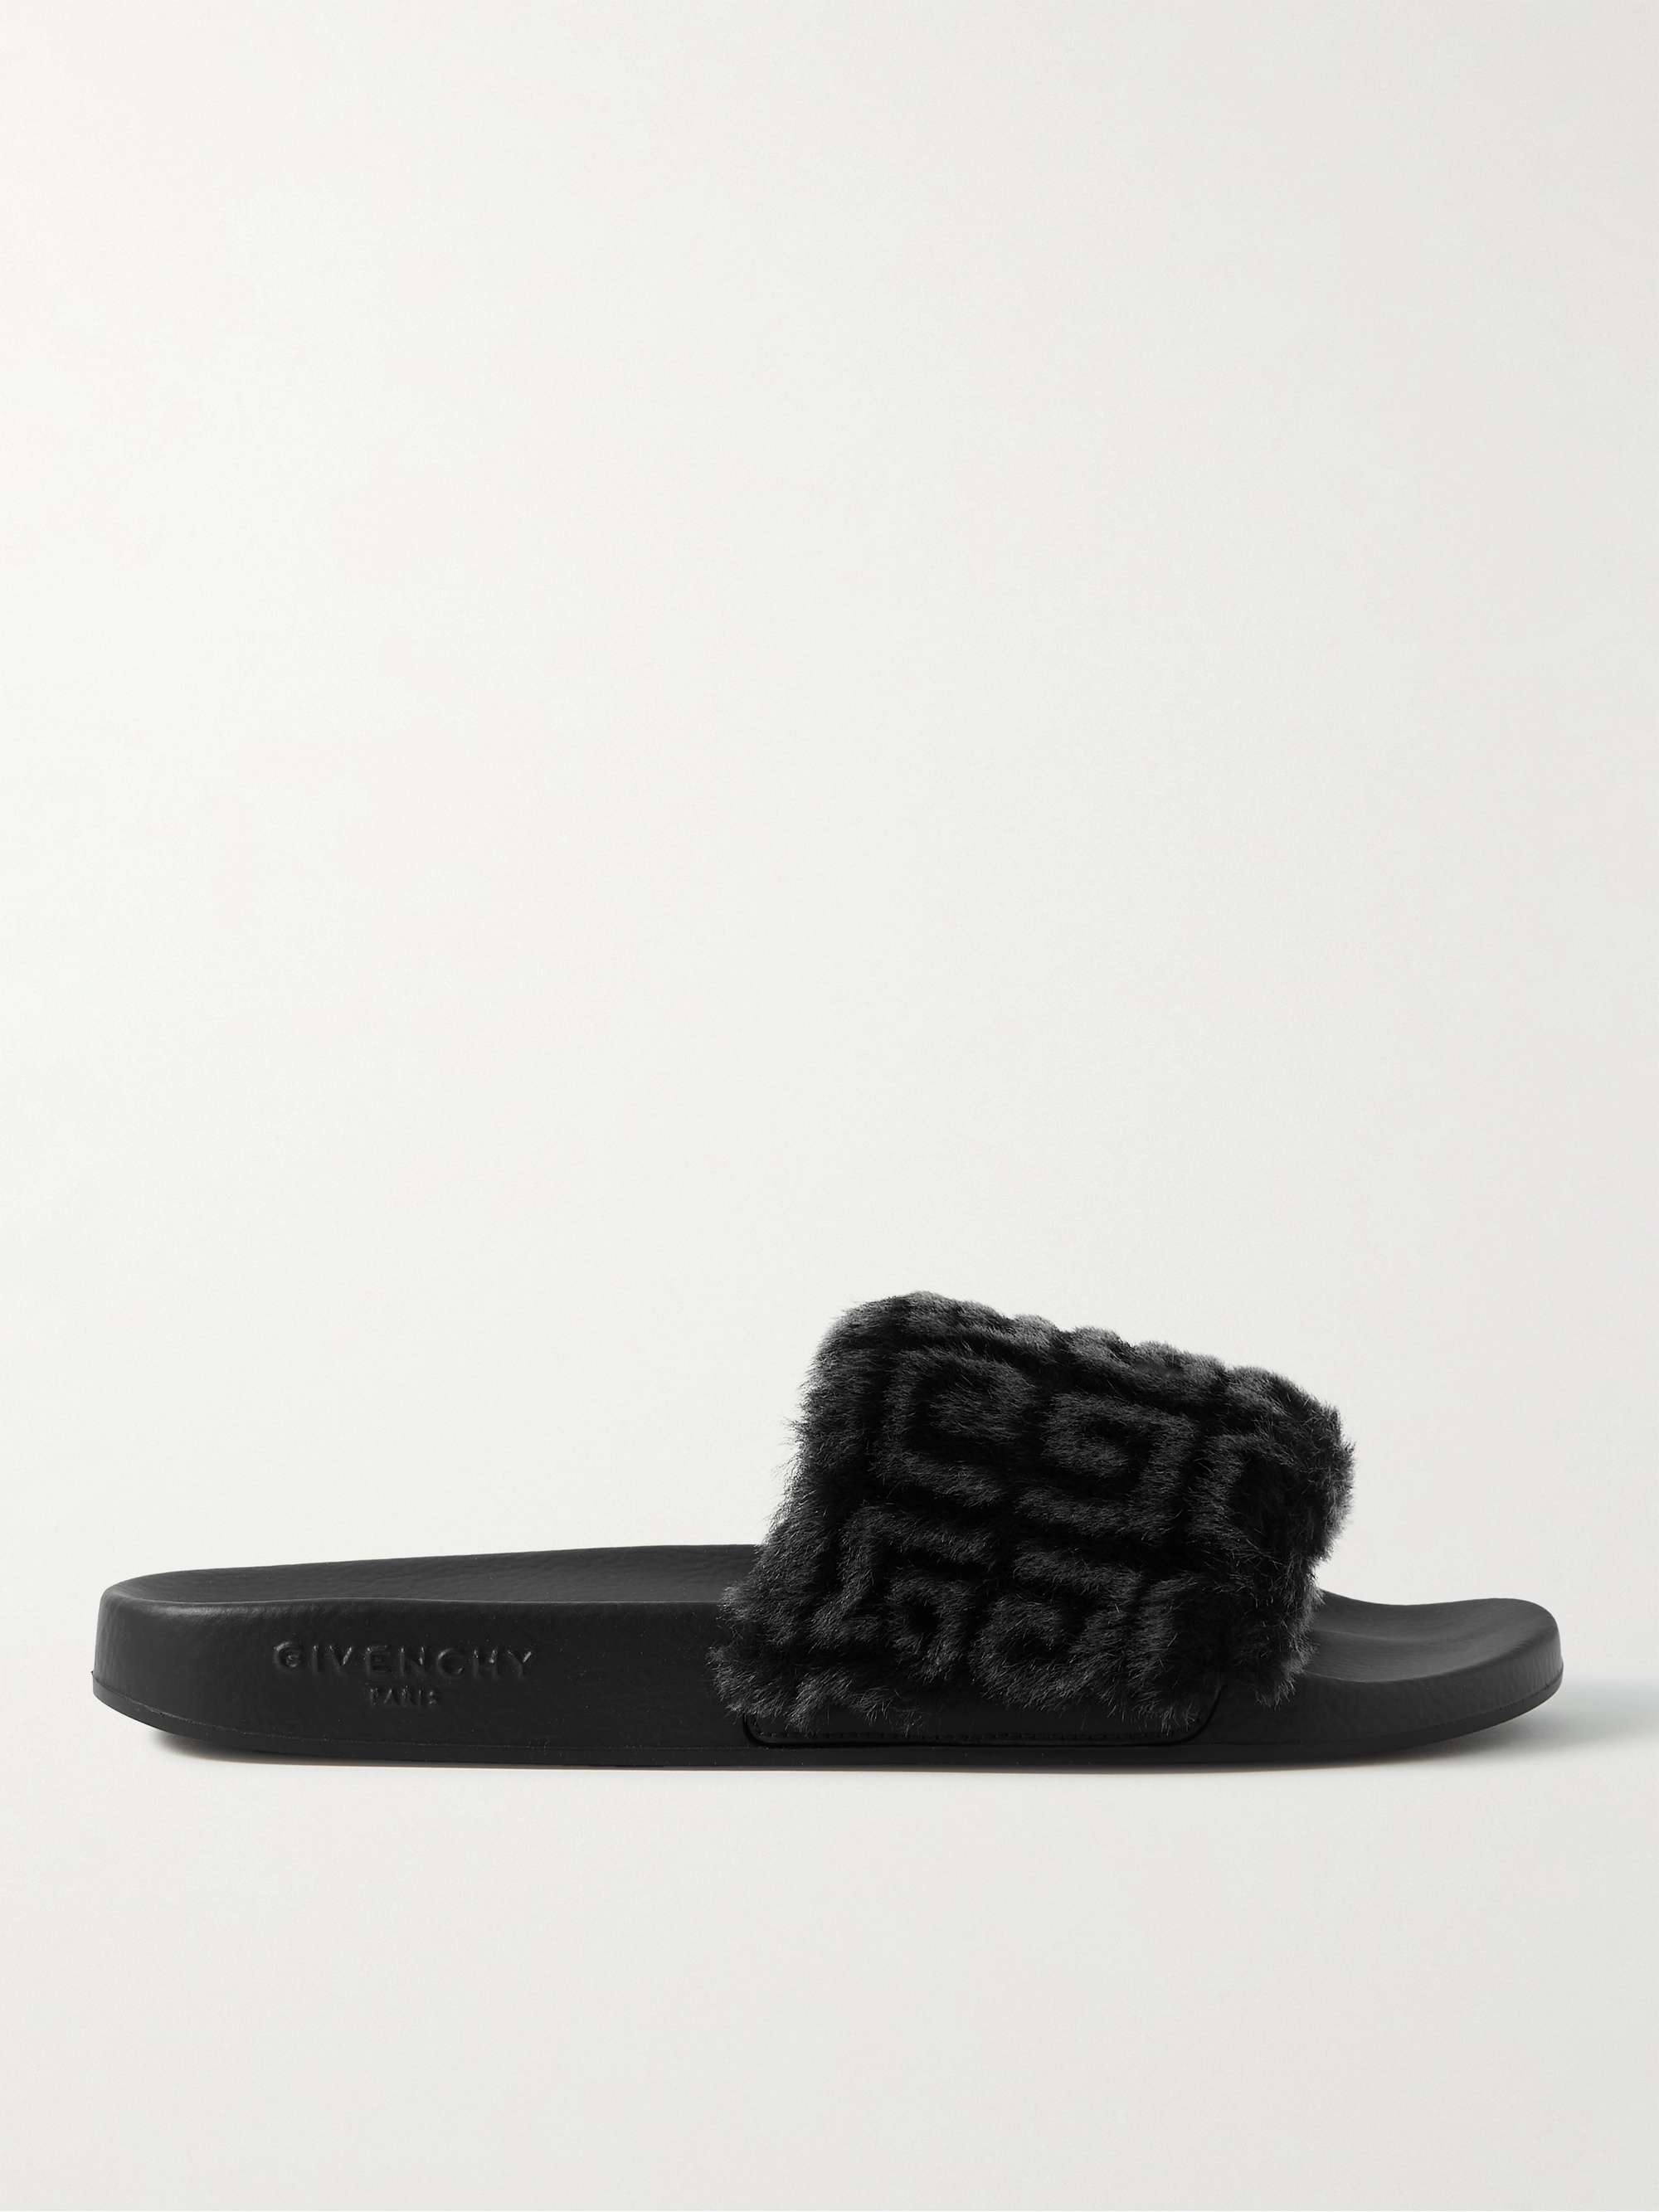 GIVENCHY Printed Shearling and Rubber Slides | MR PORTER